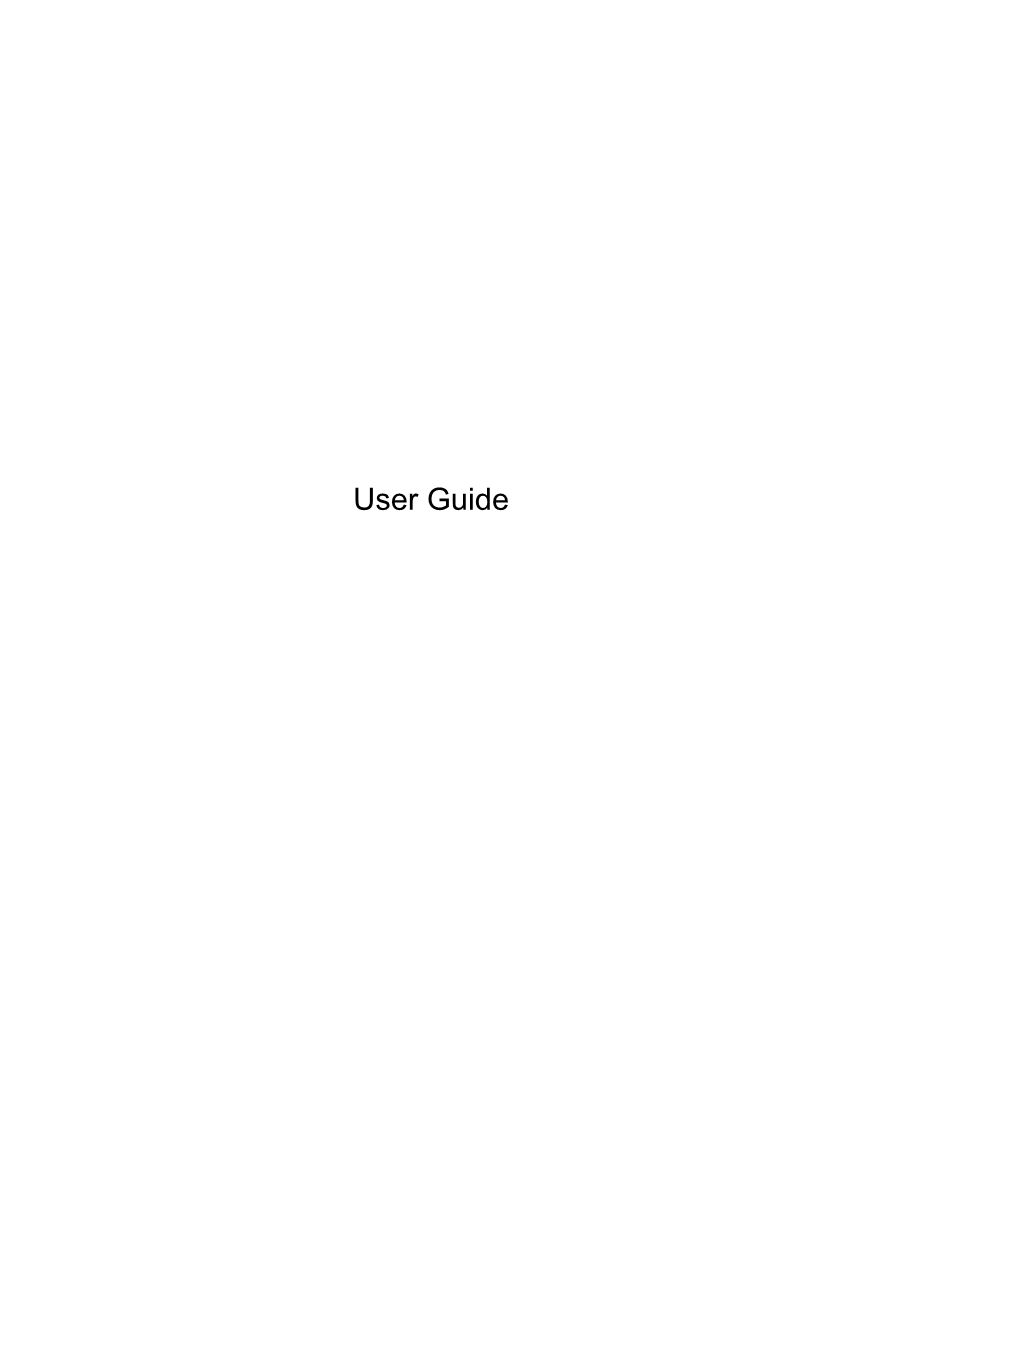 User Guide © Copyright 2013 Hewlett-Packard Product Notice Software Terms Development Company, L.P